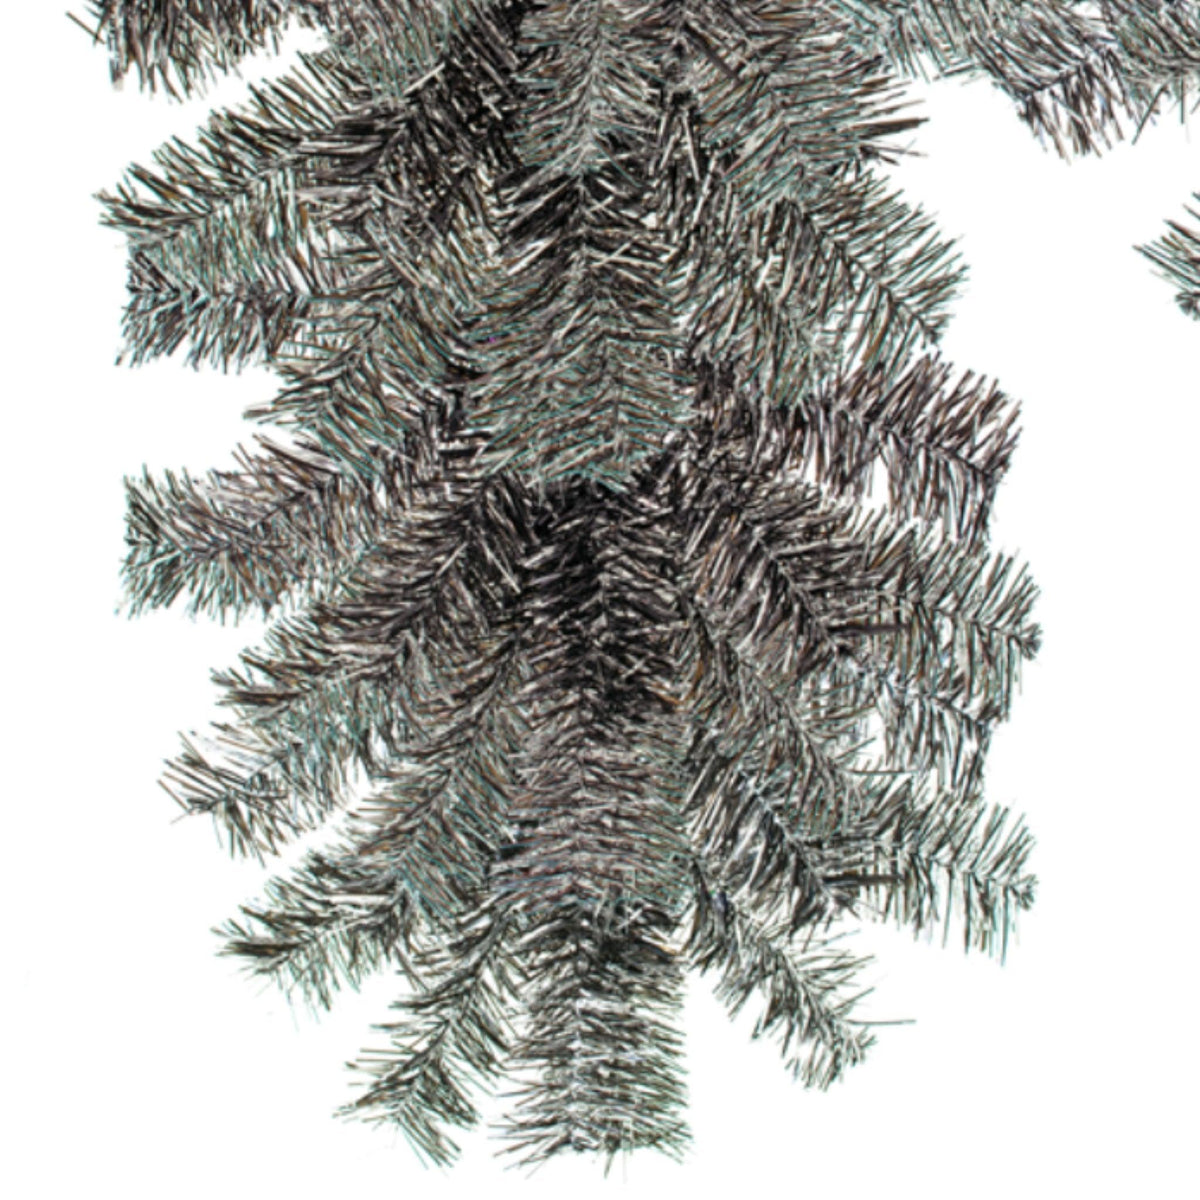 6ft Black and Silver Christmas Brush Garland is made in the USA.  Available for sale at leedisplay.com